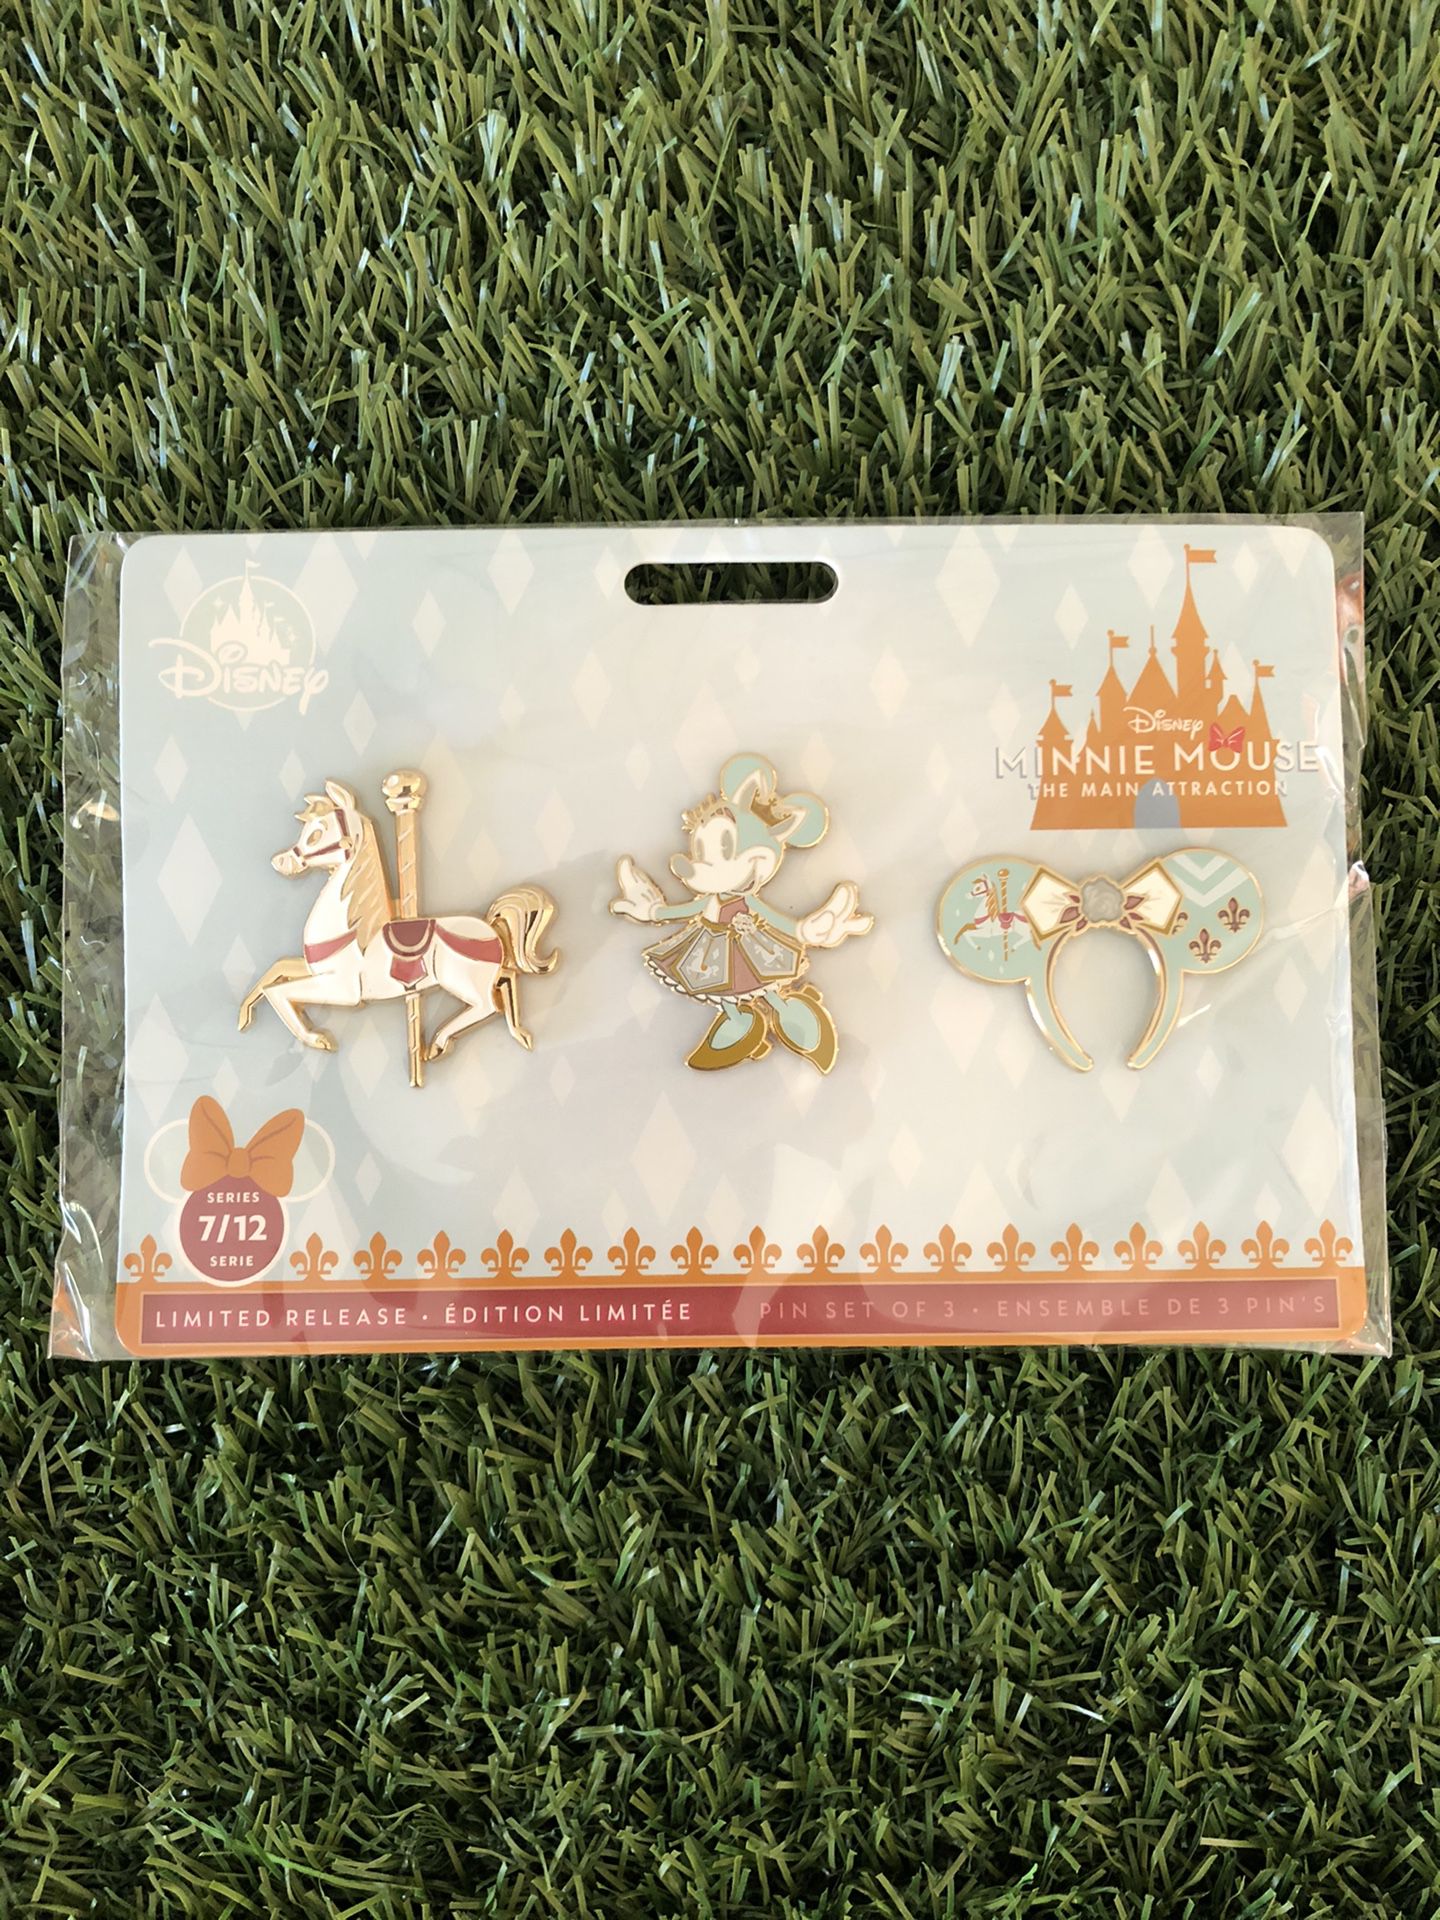 Minnie Mouse the Main Attraction pins Set July Disney